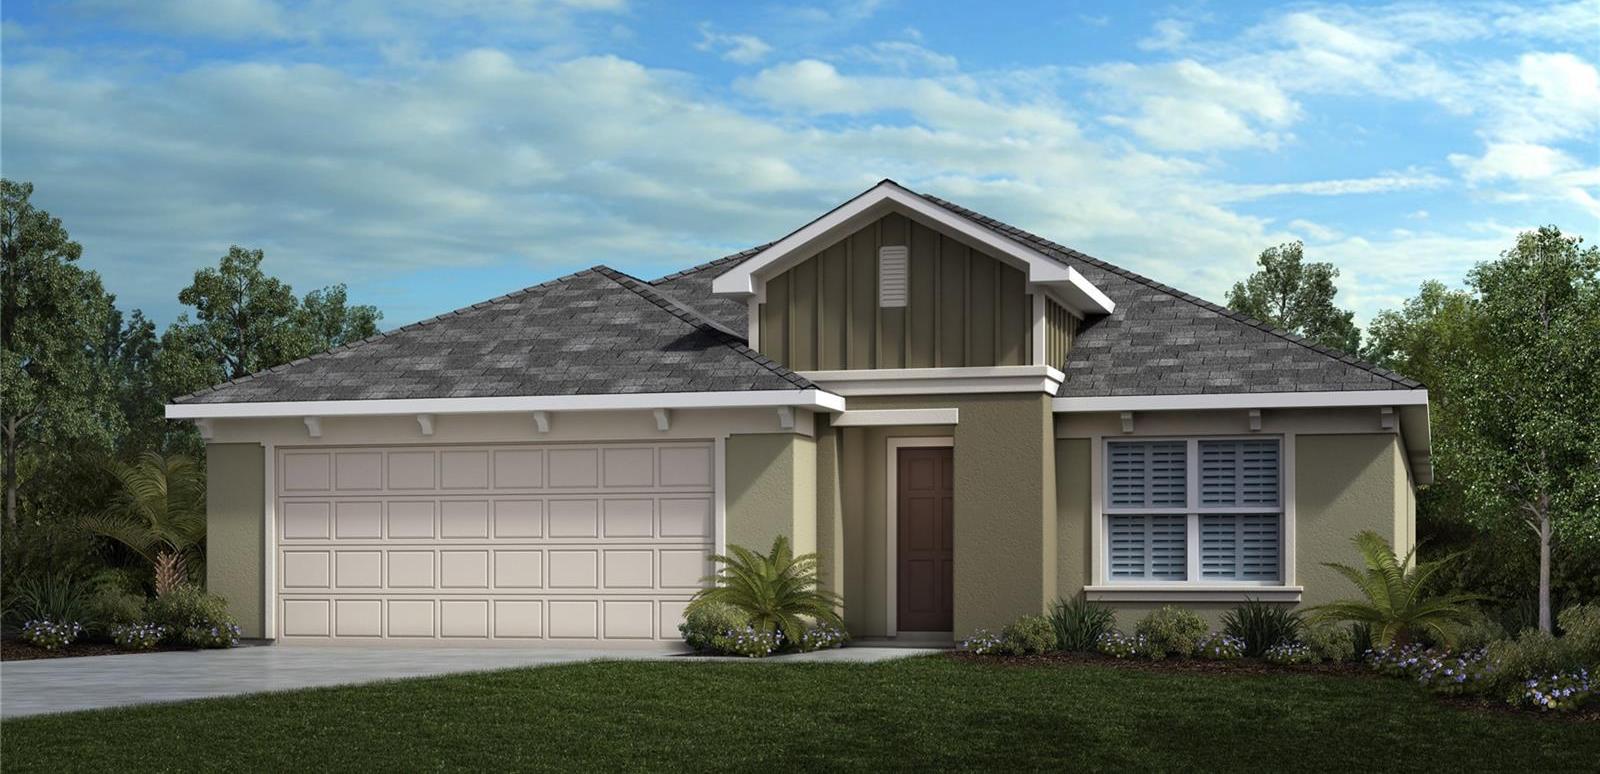 Photo one of 9125 Norley Ct Davenport FL 33896 | MLS O6167923